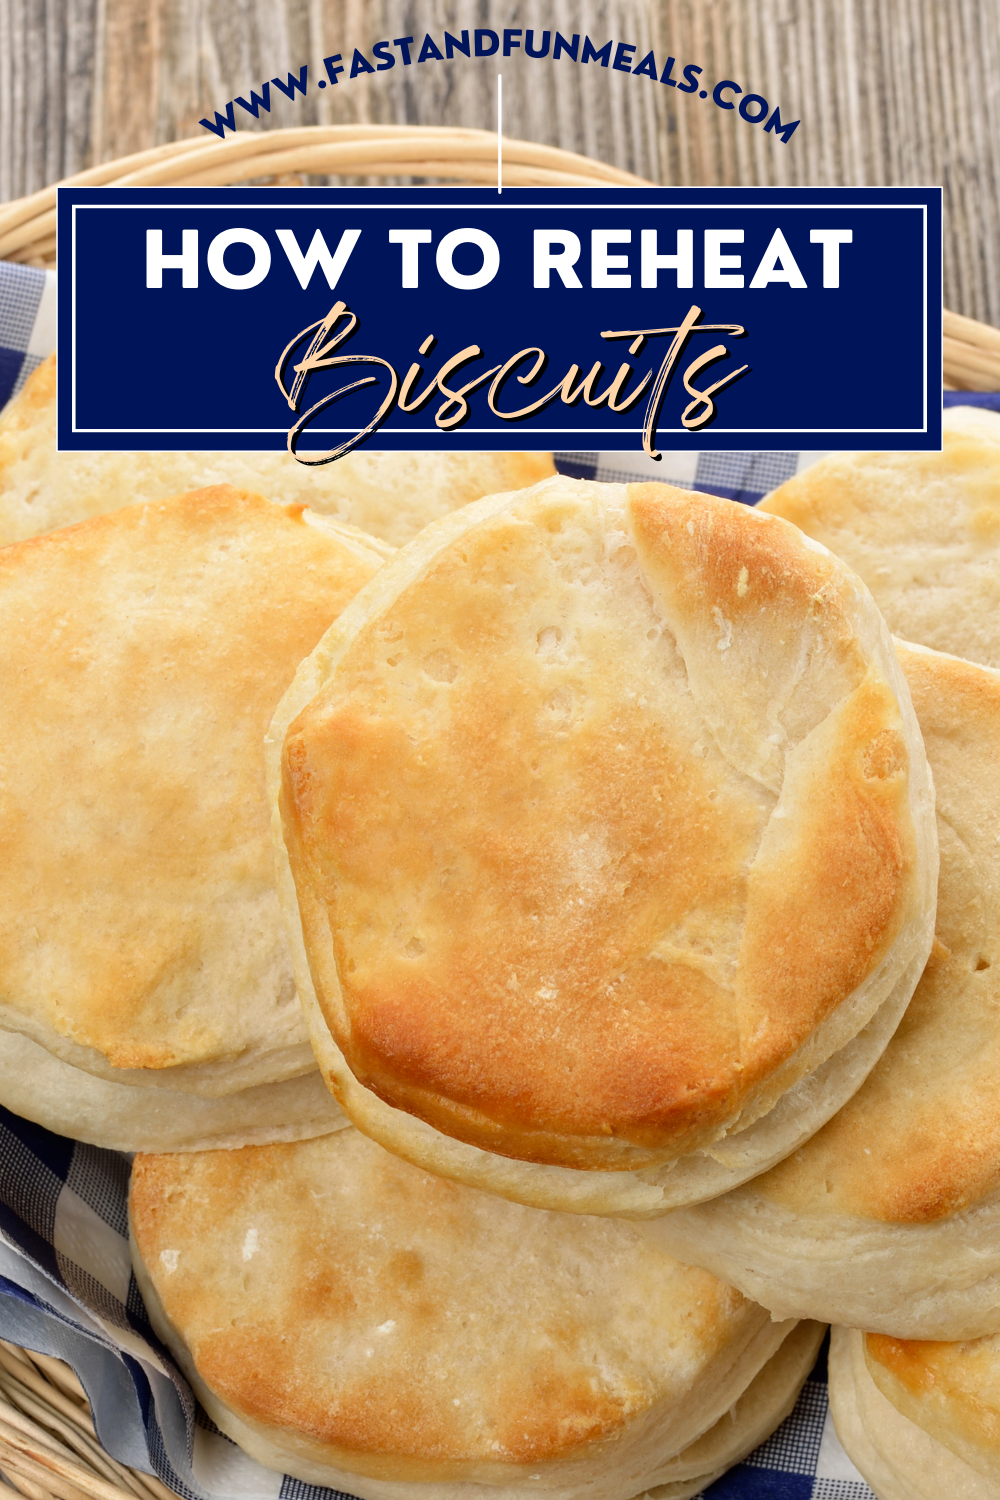 Pin showing the title How to Reheat Biscuits